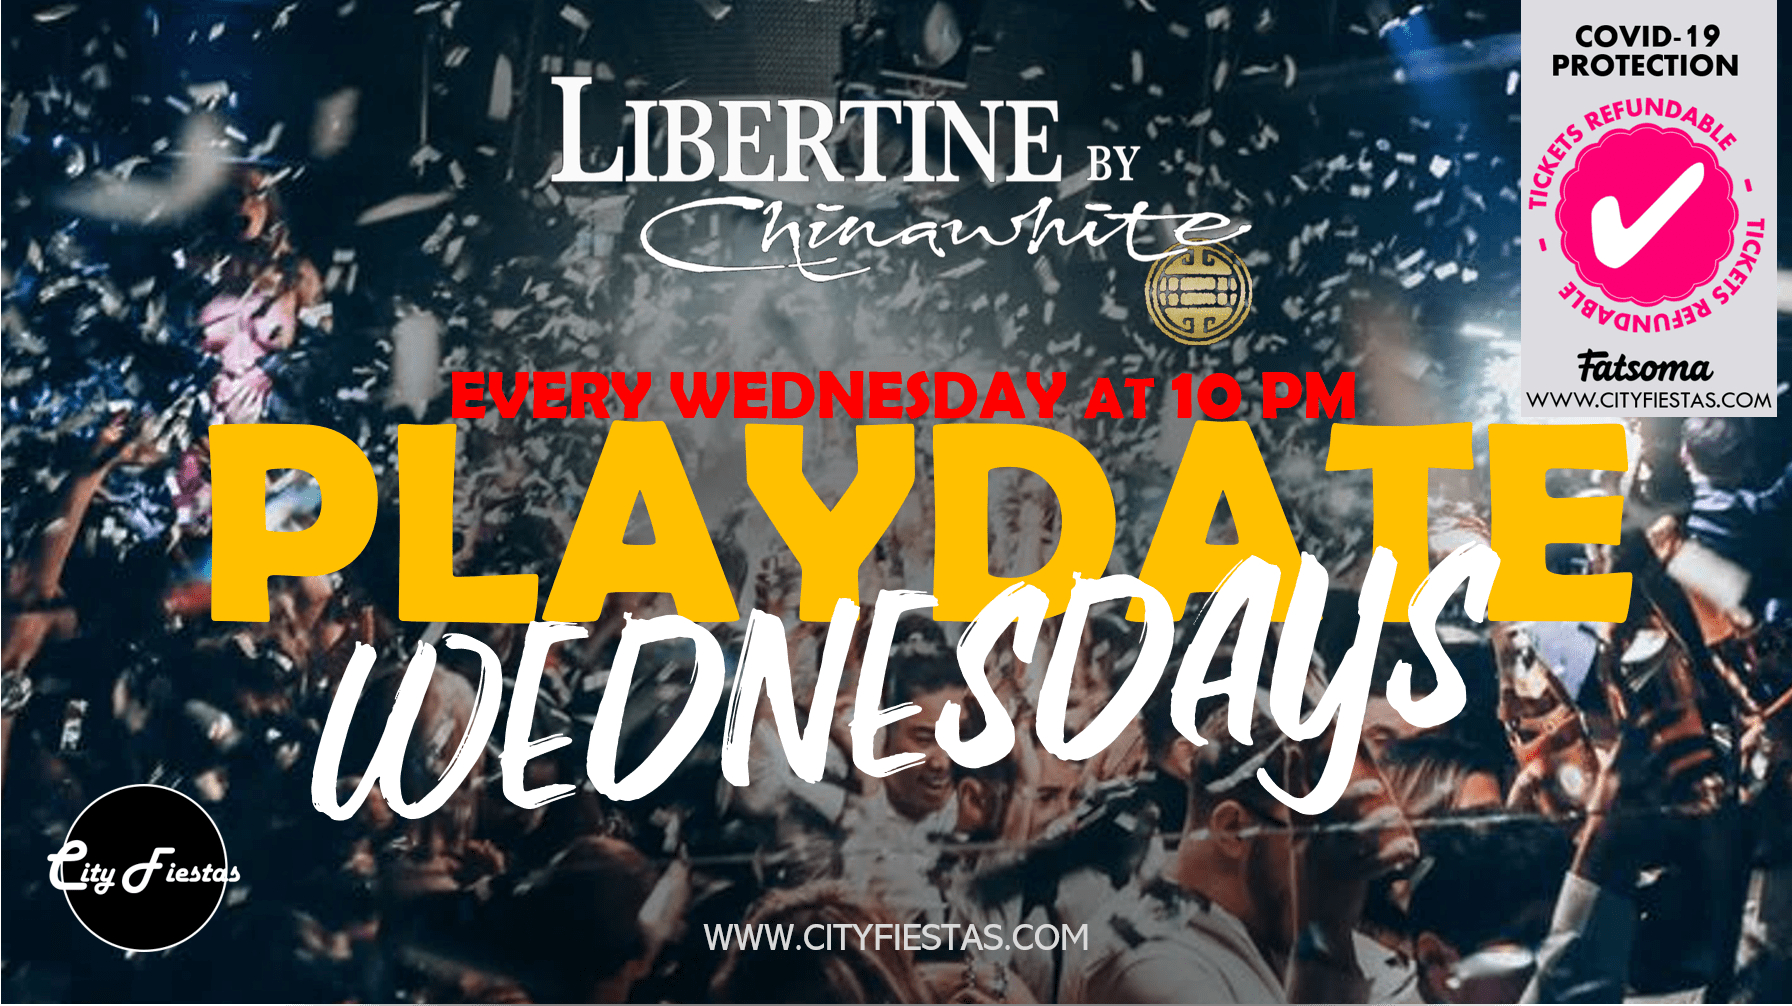 End of Term Party at Libertine Nightclub + 1 FREE DRINK 🍸